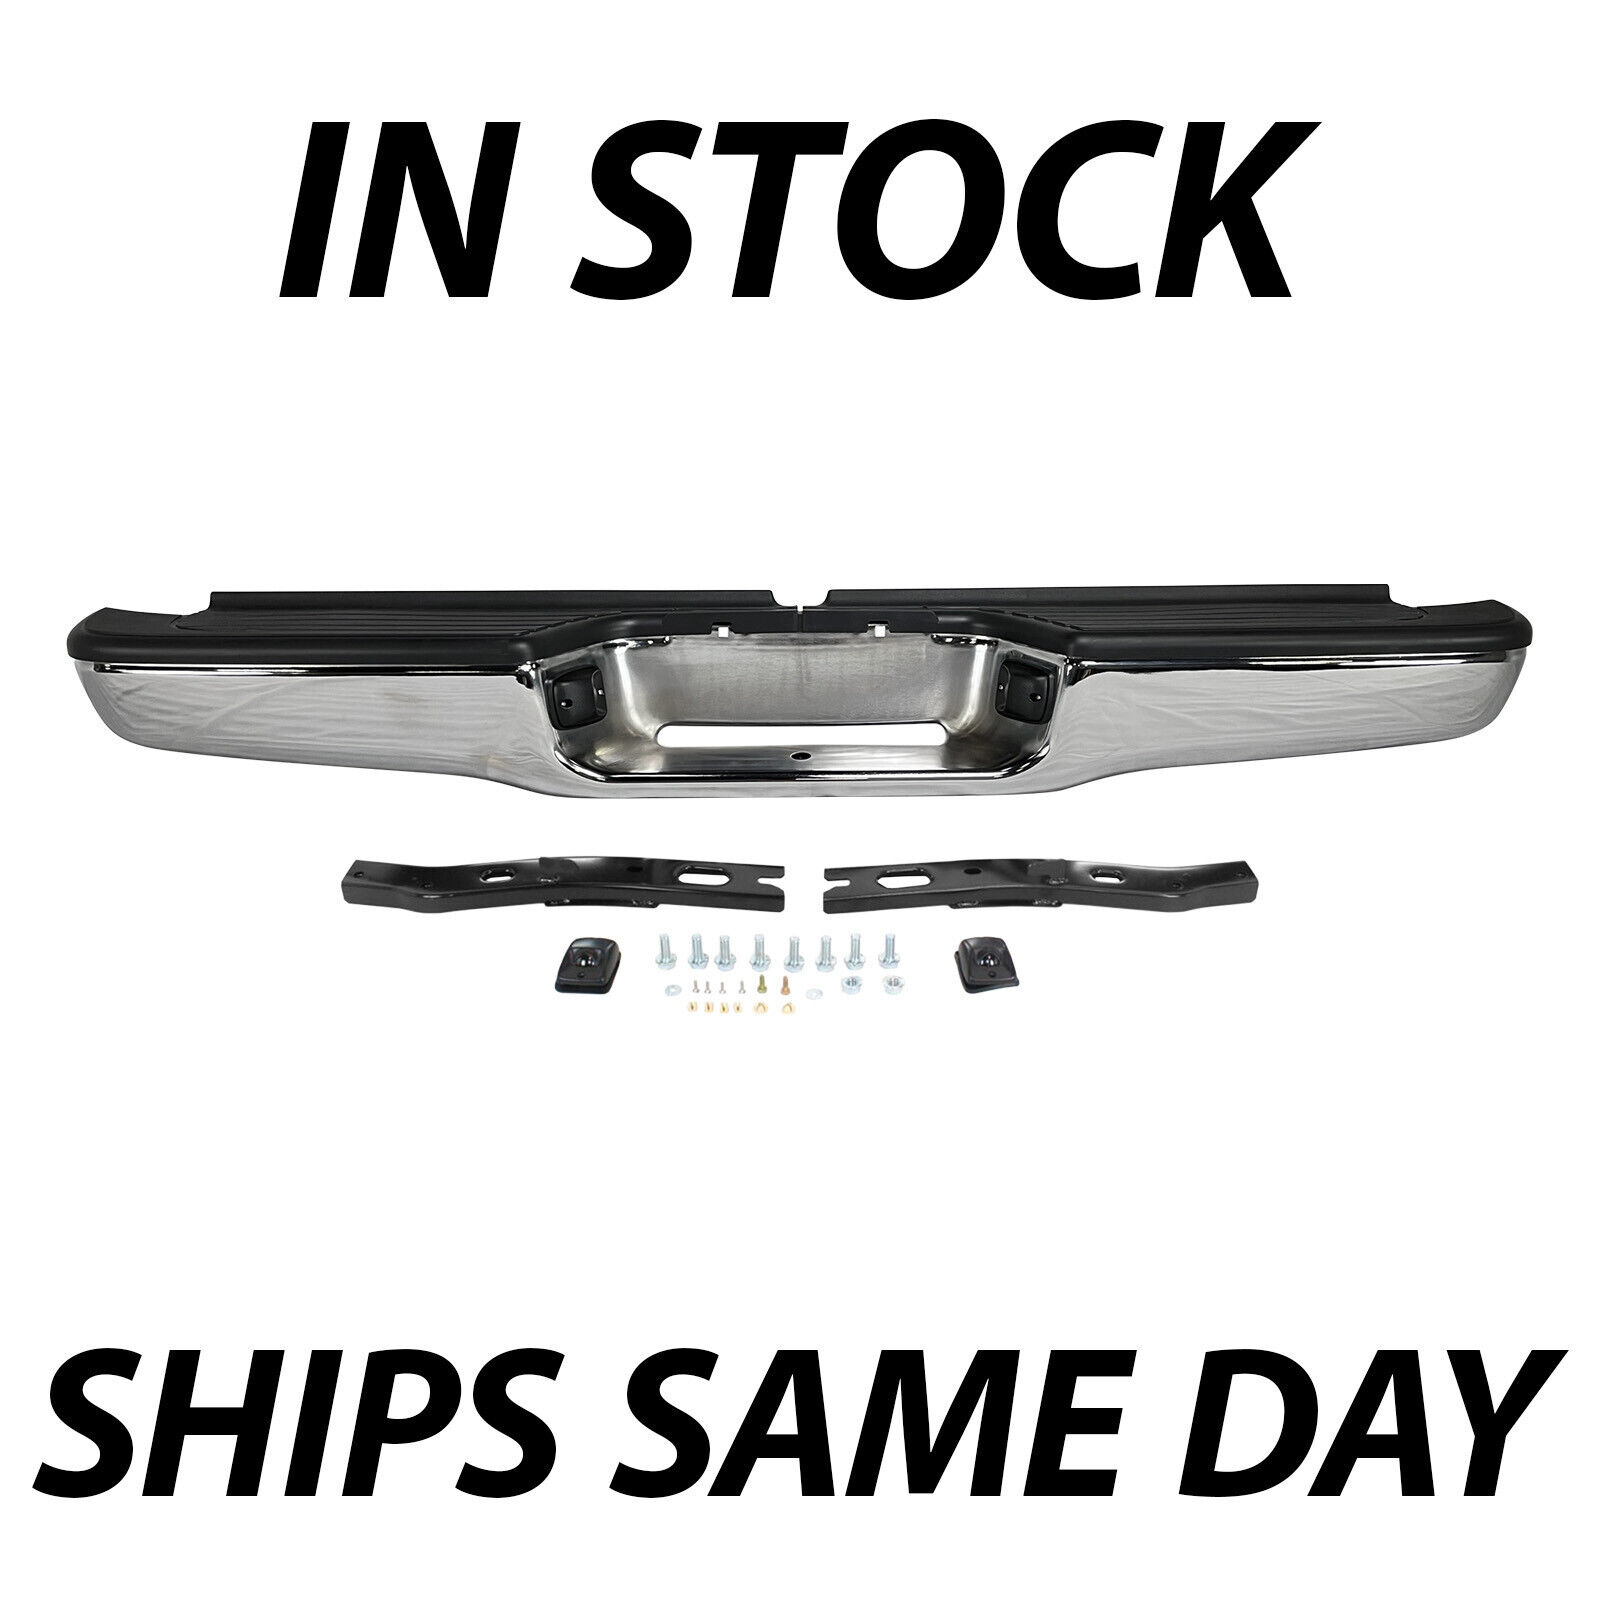 NEW Chrome - Complete Rear Steel Bumper Assembly for 1995-2004 Toyota Tacoma